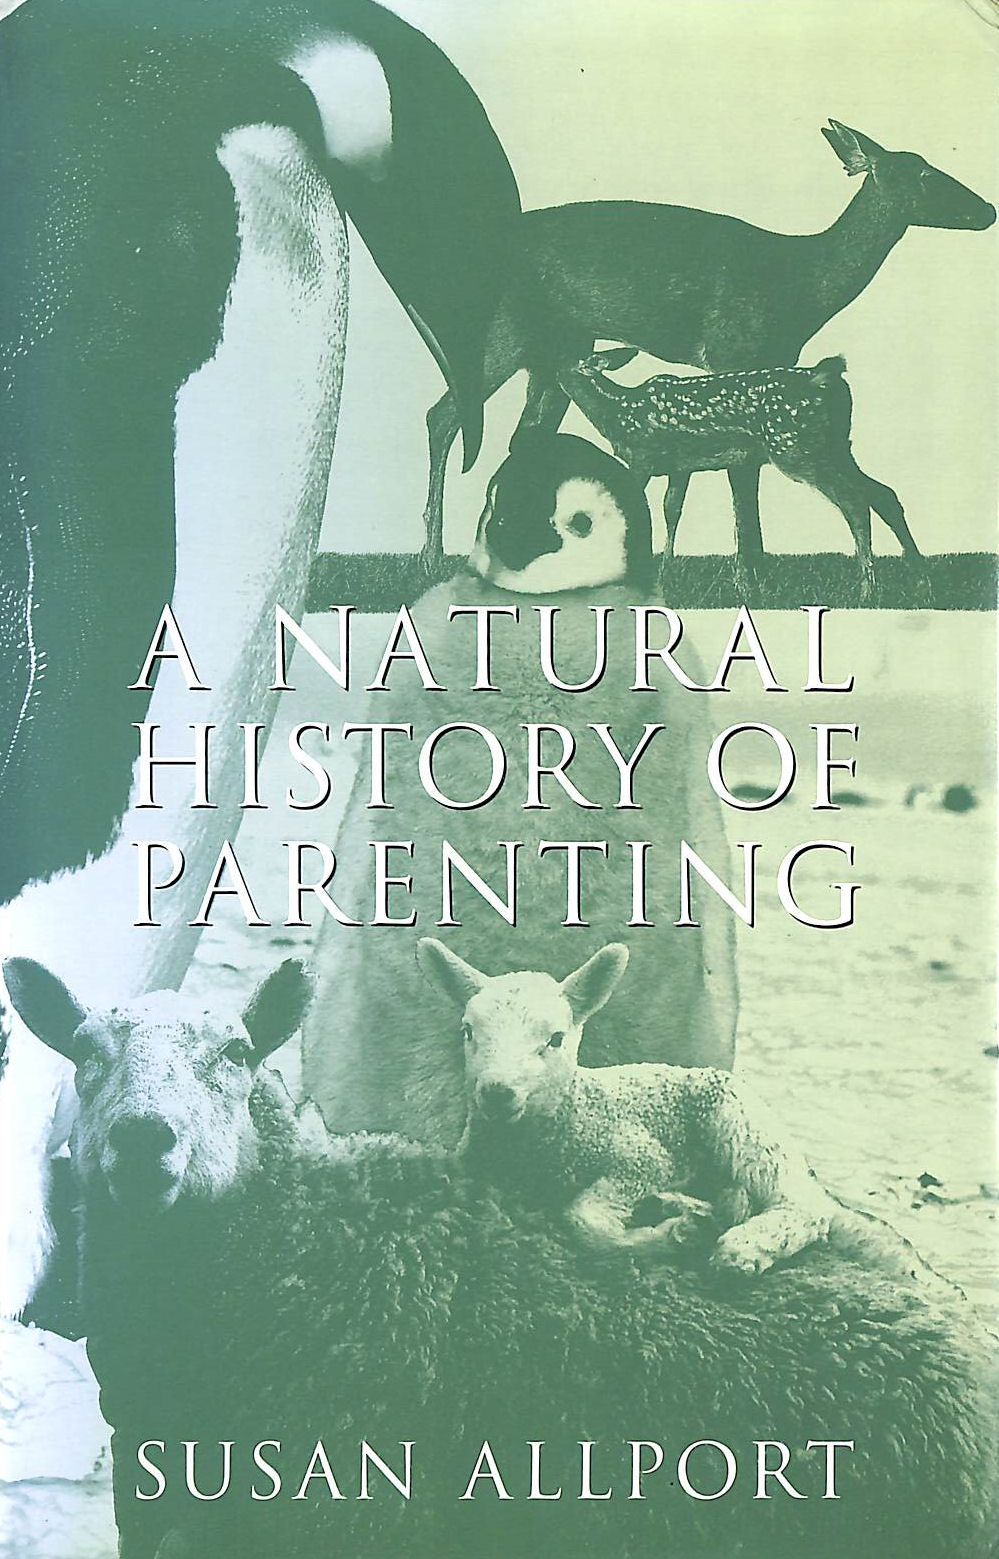 ALLPORT, SUSAN - A Natural History of Parenting: From Emperor Penguins to Reluctant Ewes, a Naturalist Looks at Parenting in the Animal World and Ours